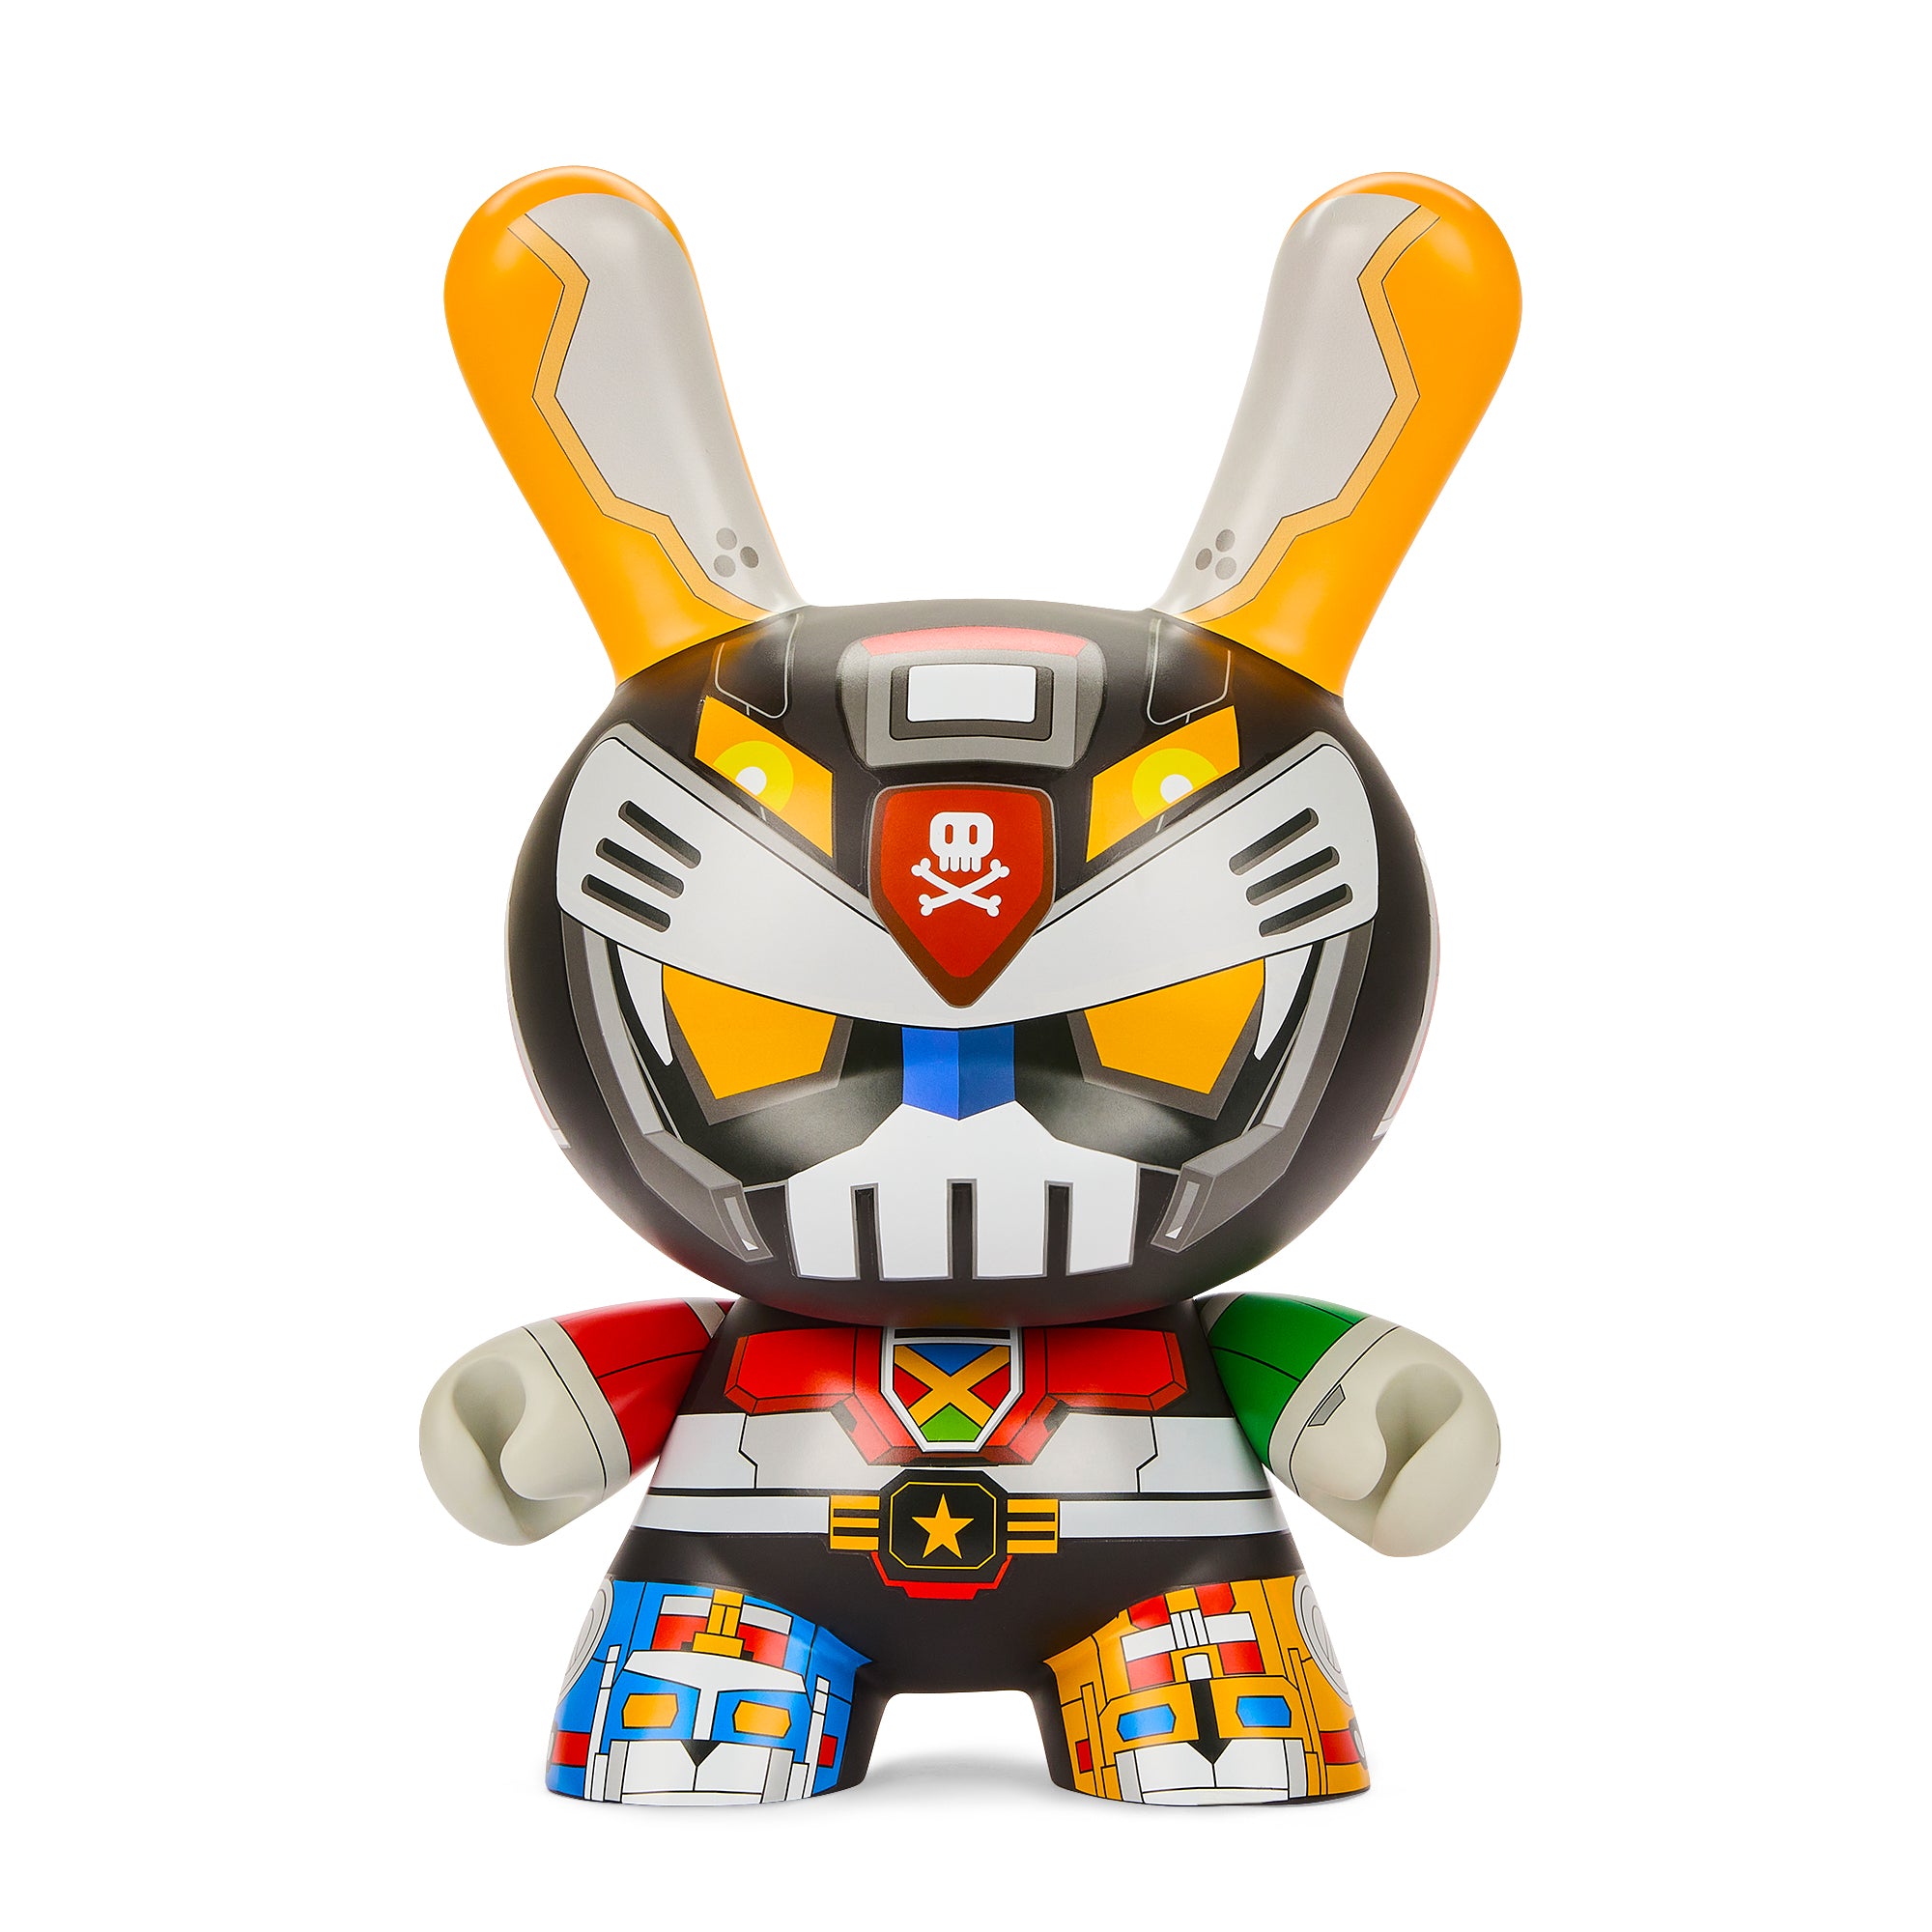 Image of VOLTEQ 20” Dunny Vinyl Art Figure by Quiccs - Limited Edition of 500